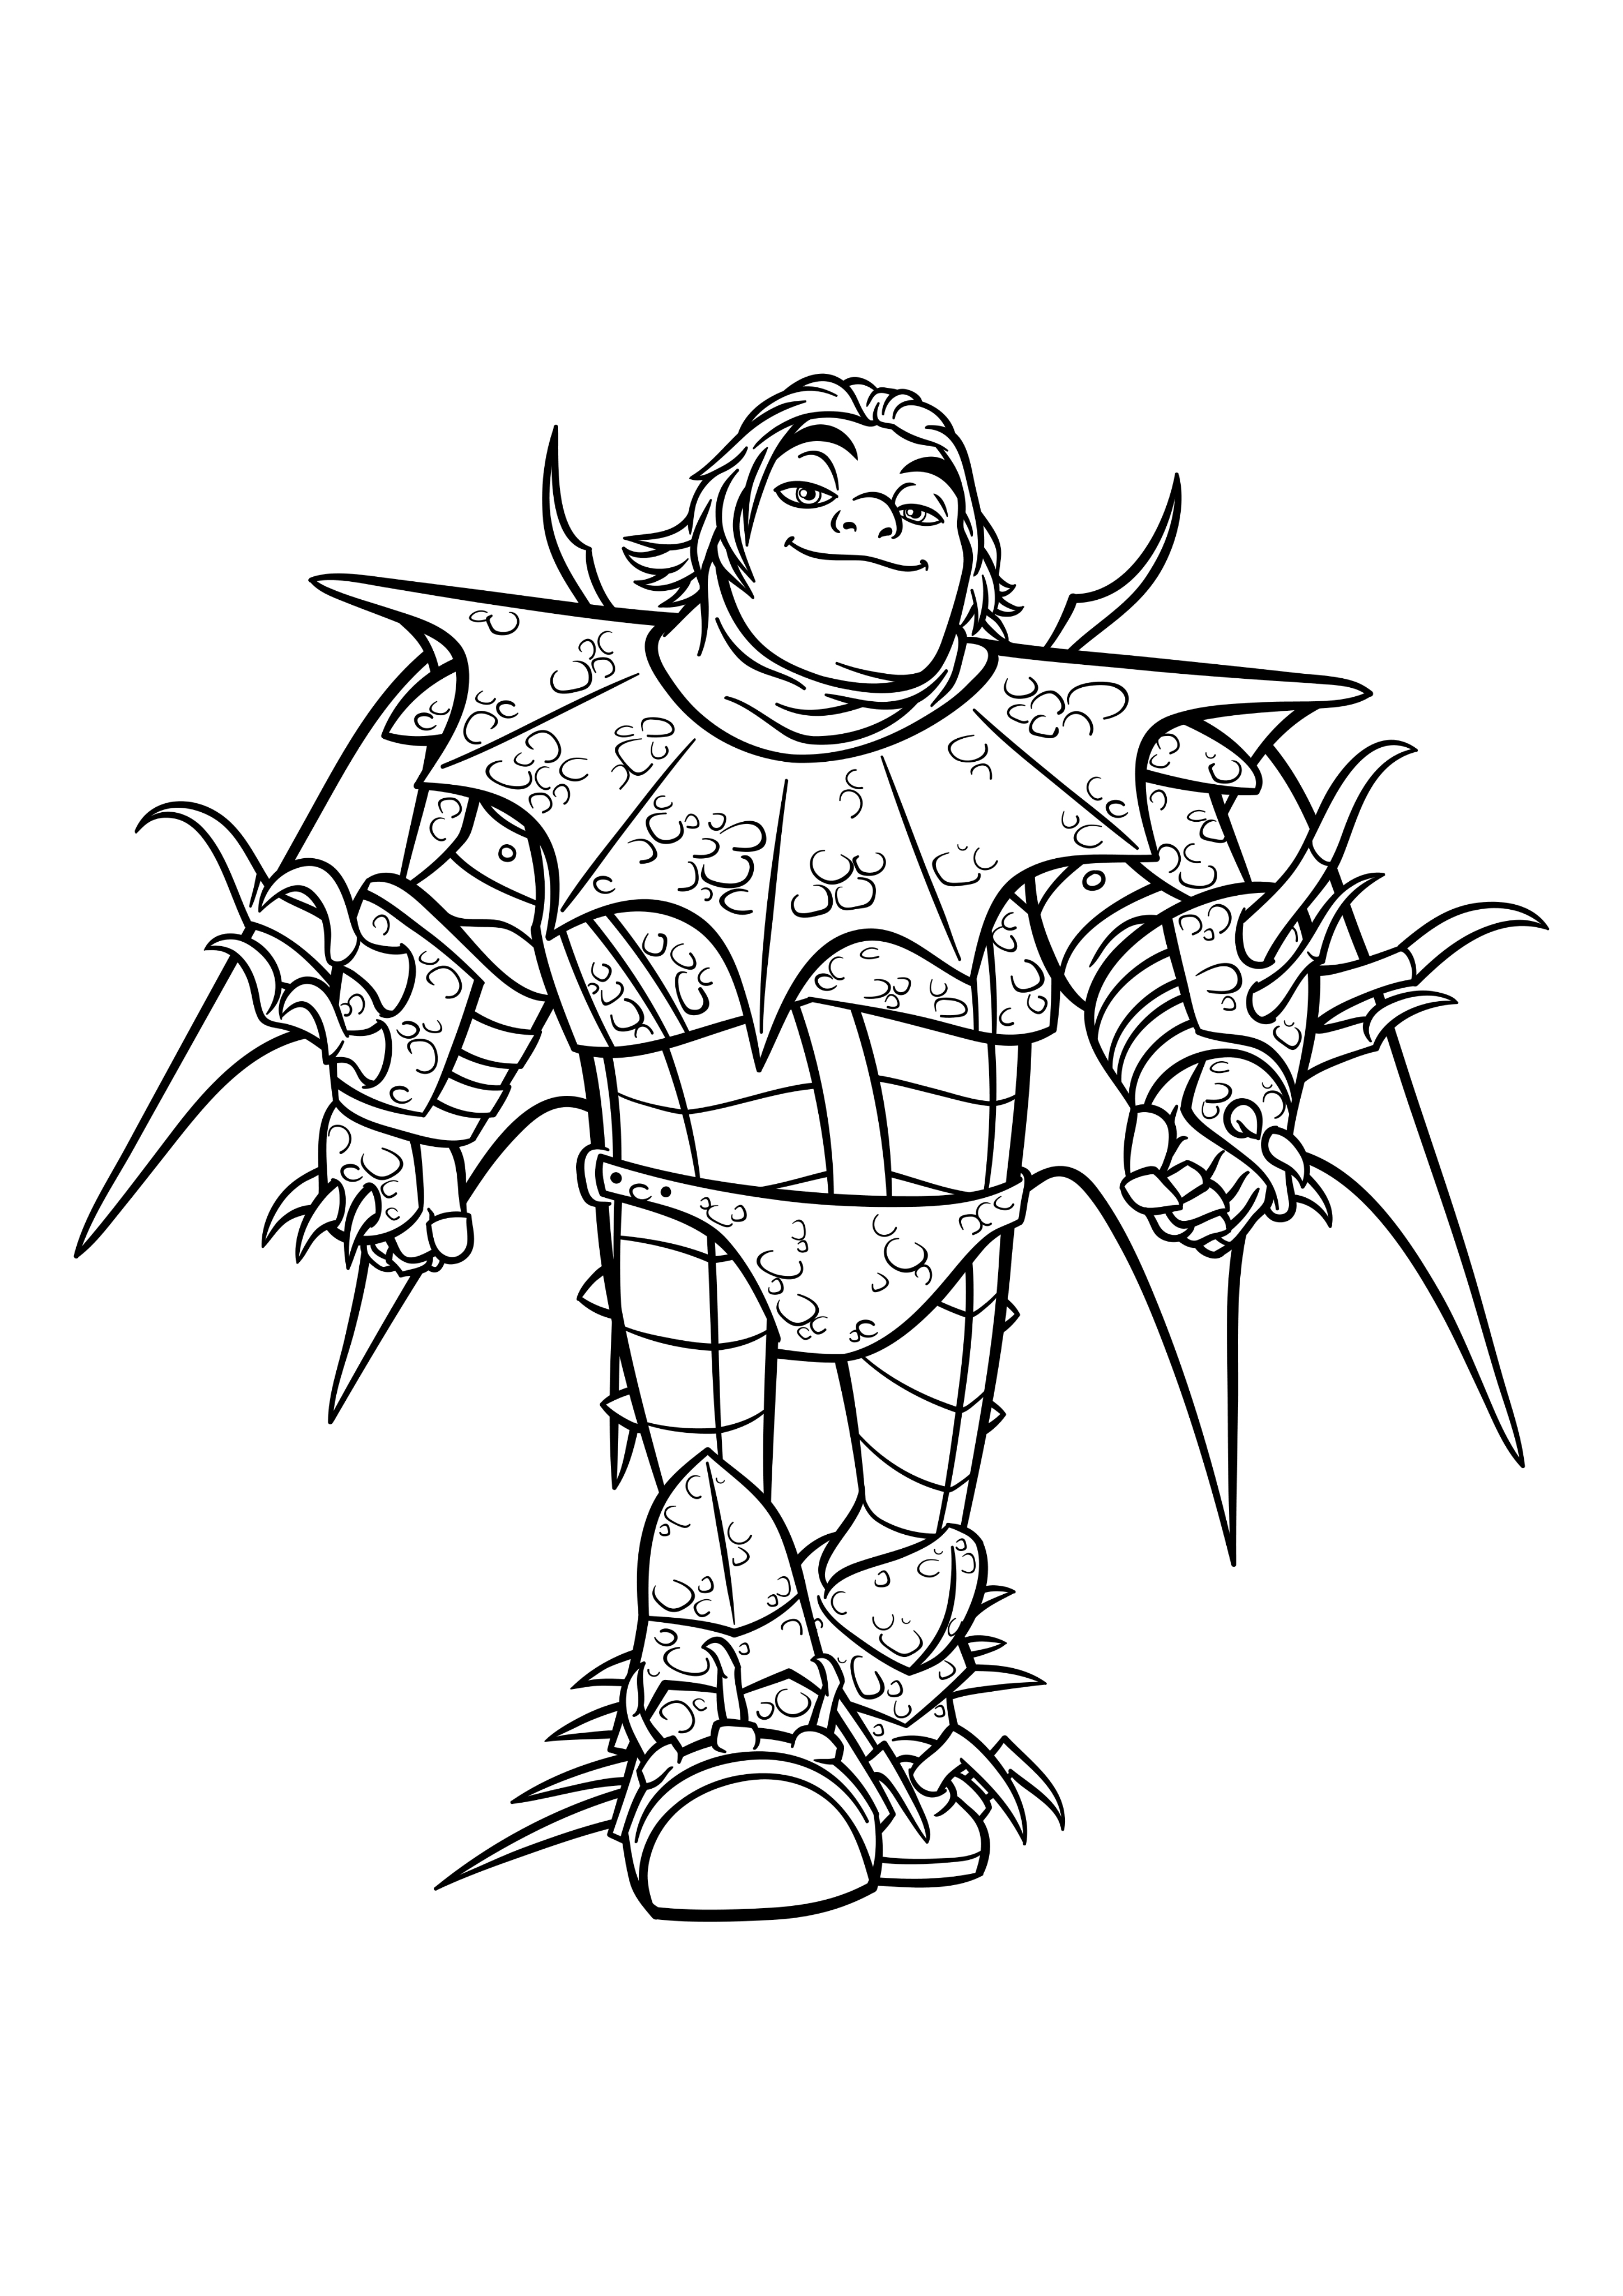 Coloring page How to Train Your Dragon 3 Snotlout Jorgenson